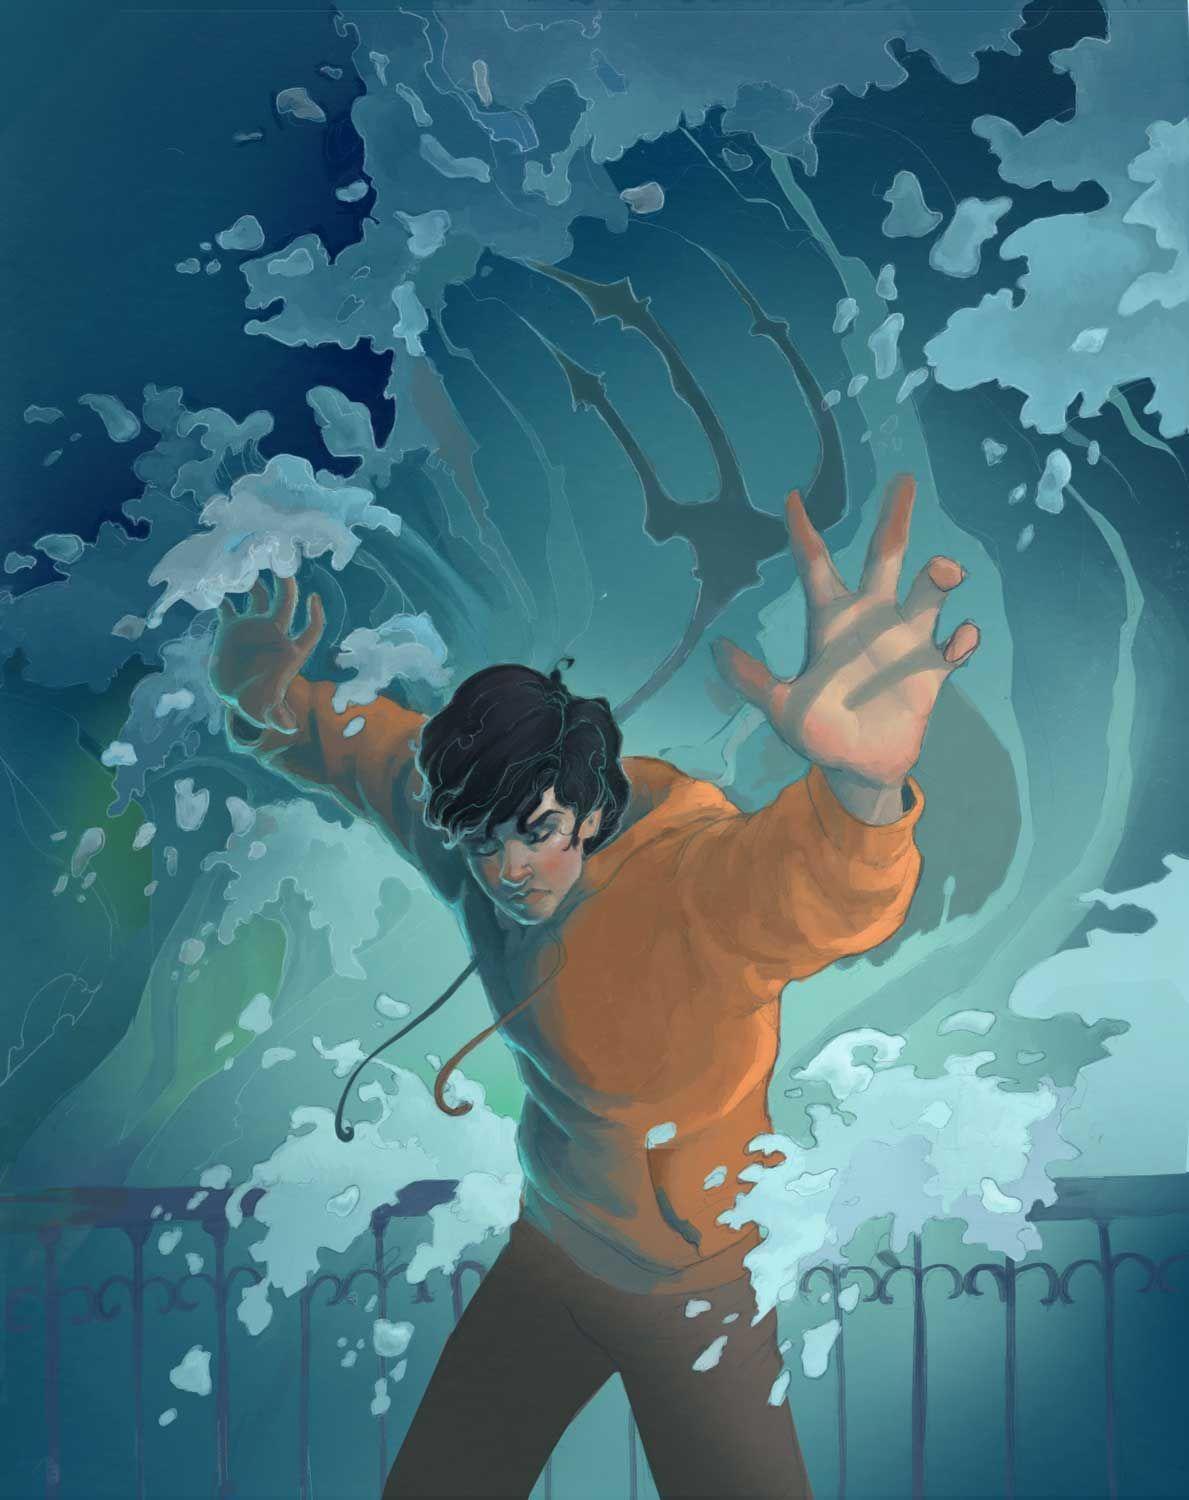 Percy Jackson Art Wallpapers Top Free Percy Jackson Art Backgrounds Wallpaperaccess